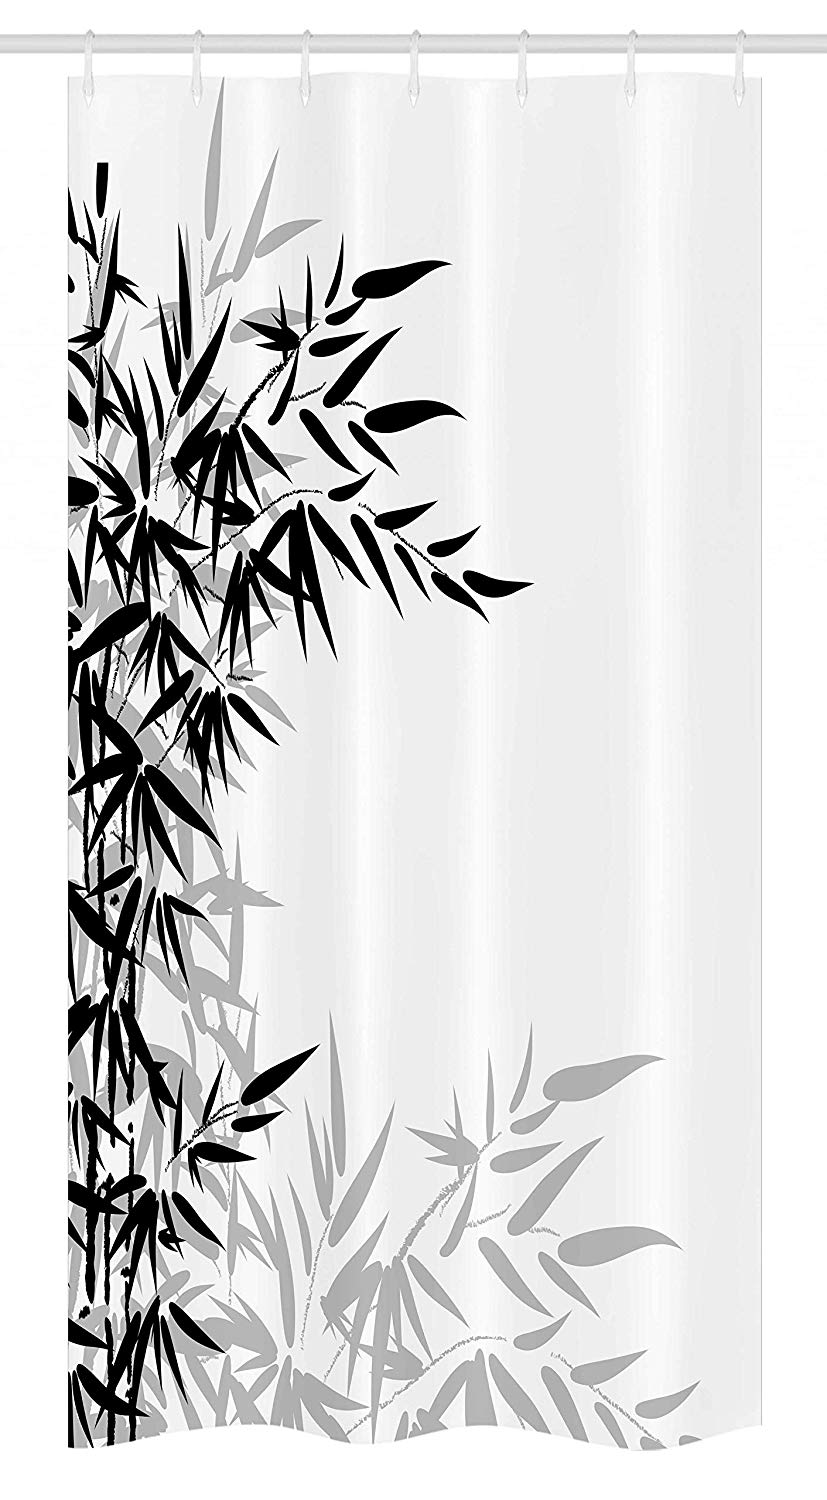 Ambesonne Bamboo Stall Shower Curtain, Bamboo Leaves on Clear Simple Background Organic Life Artistic Illustration, Fabric Bathroom Decor Set with Hooks, 36 W x 72 L Inches, Black and White